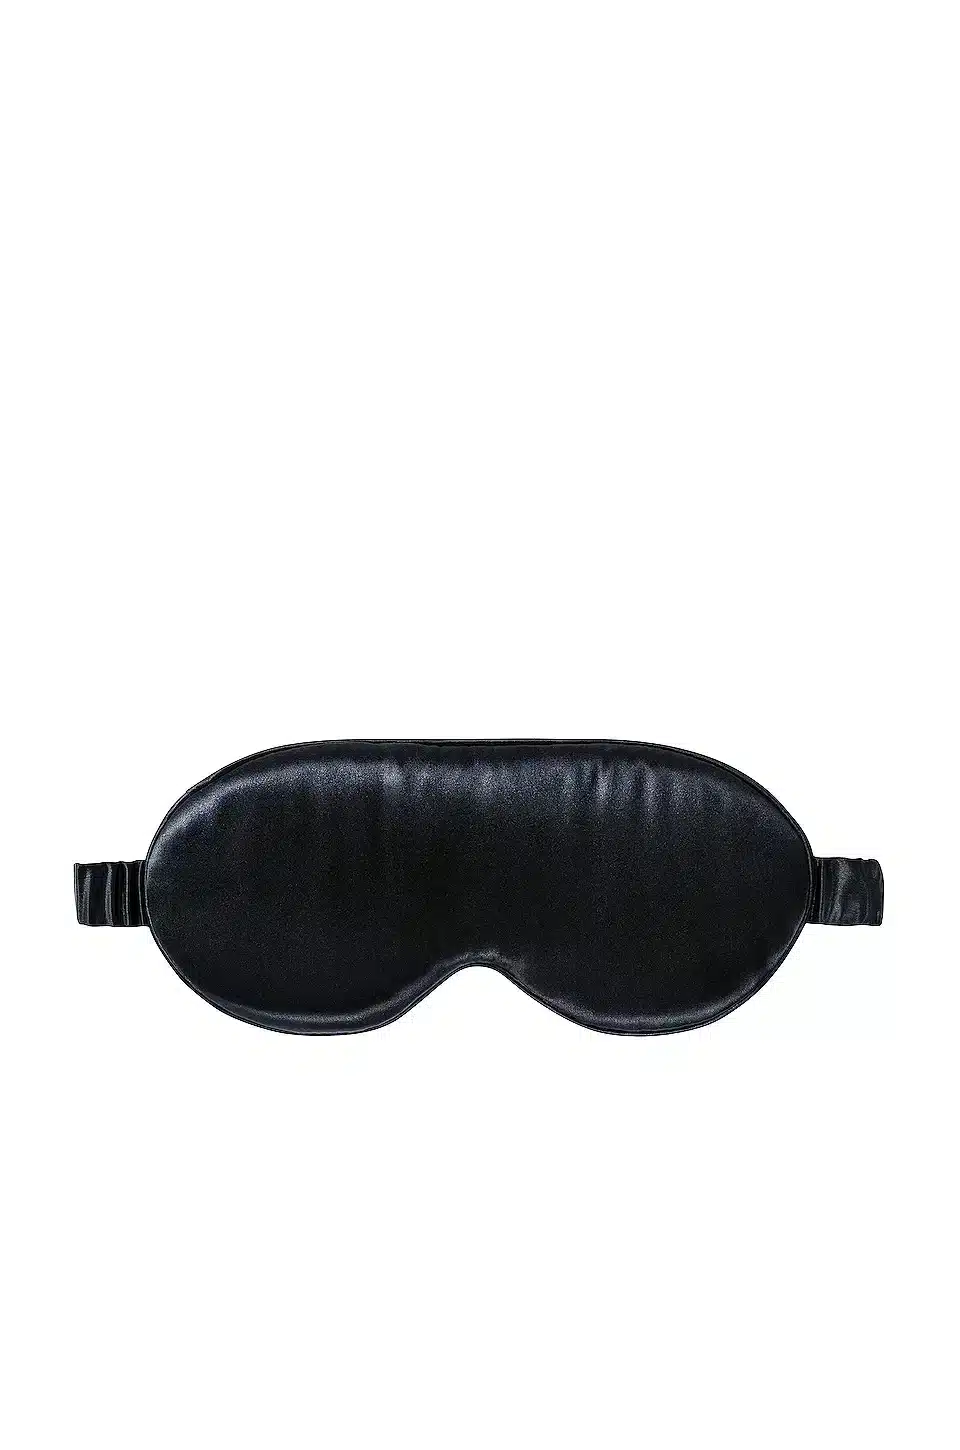 Relax on the plane with this pure silk lovely lashes contour sleep mask.